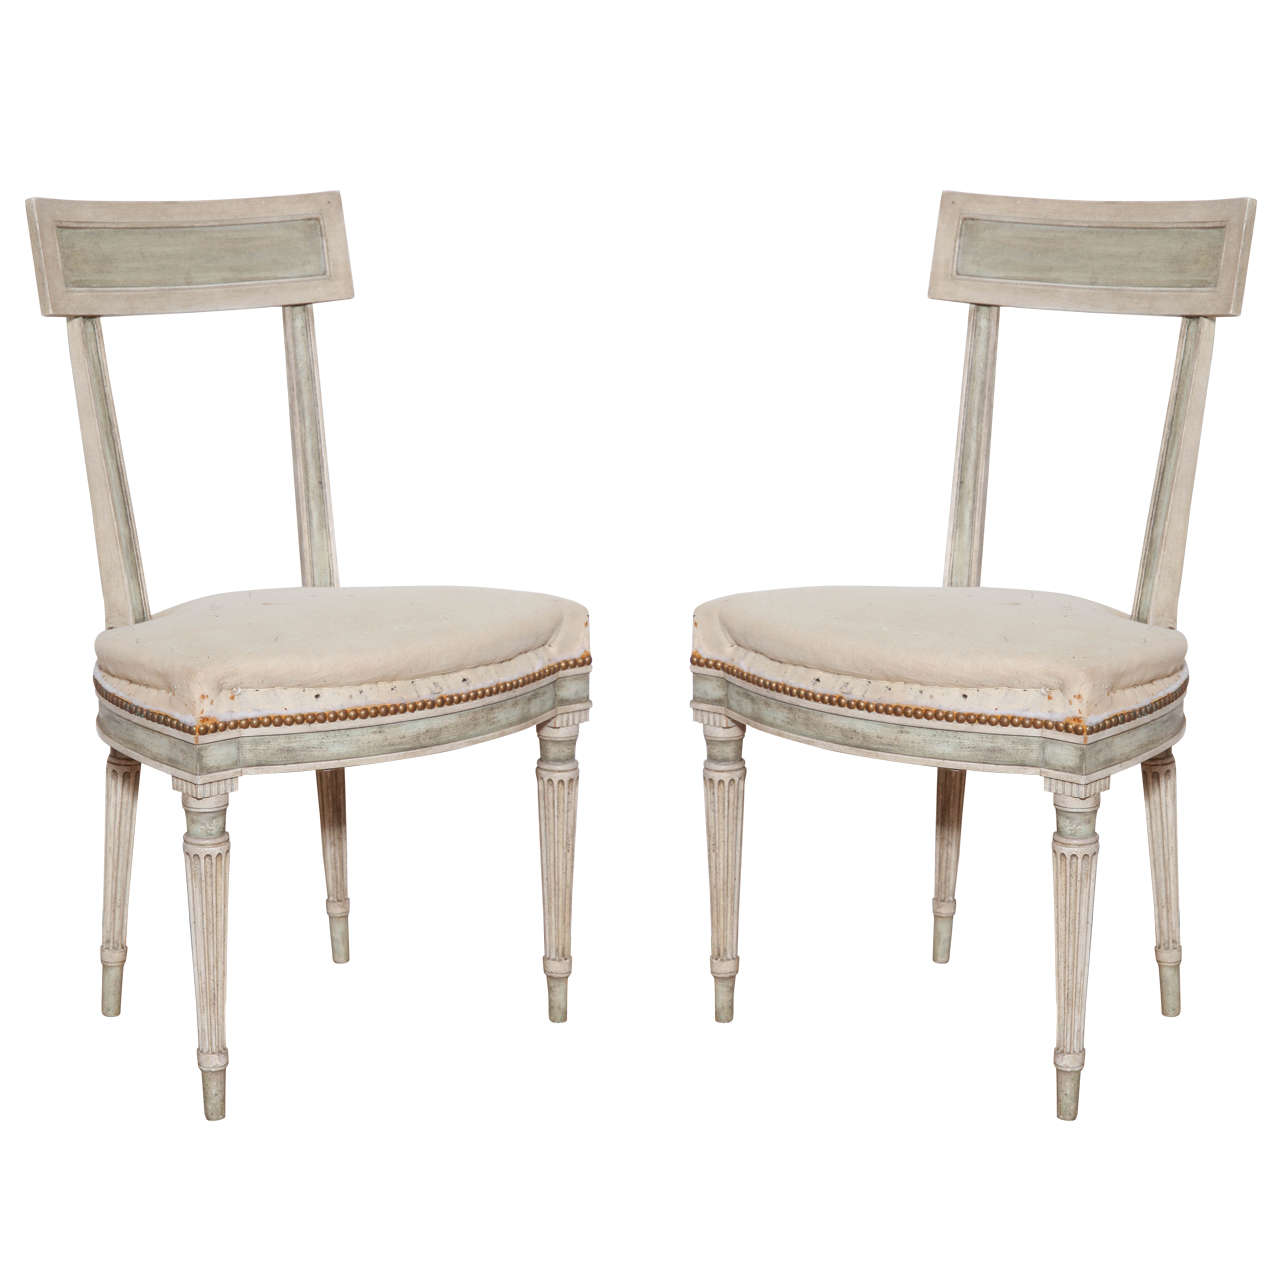 A Set of 4 Carved and Painted Directoire Style Chairs, France 1920's For Sale